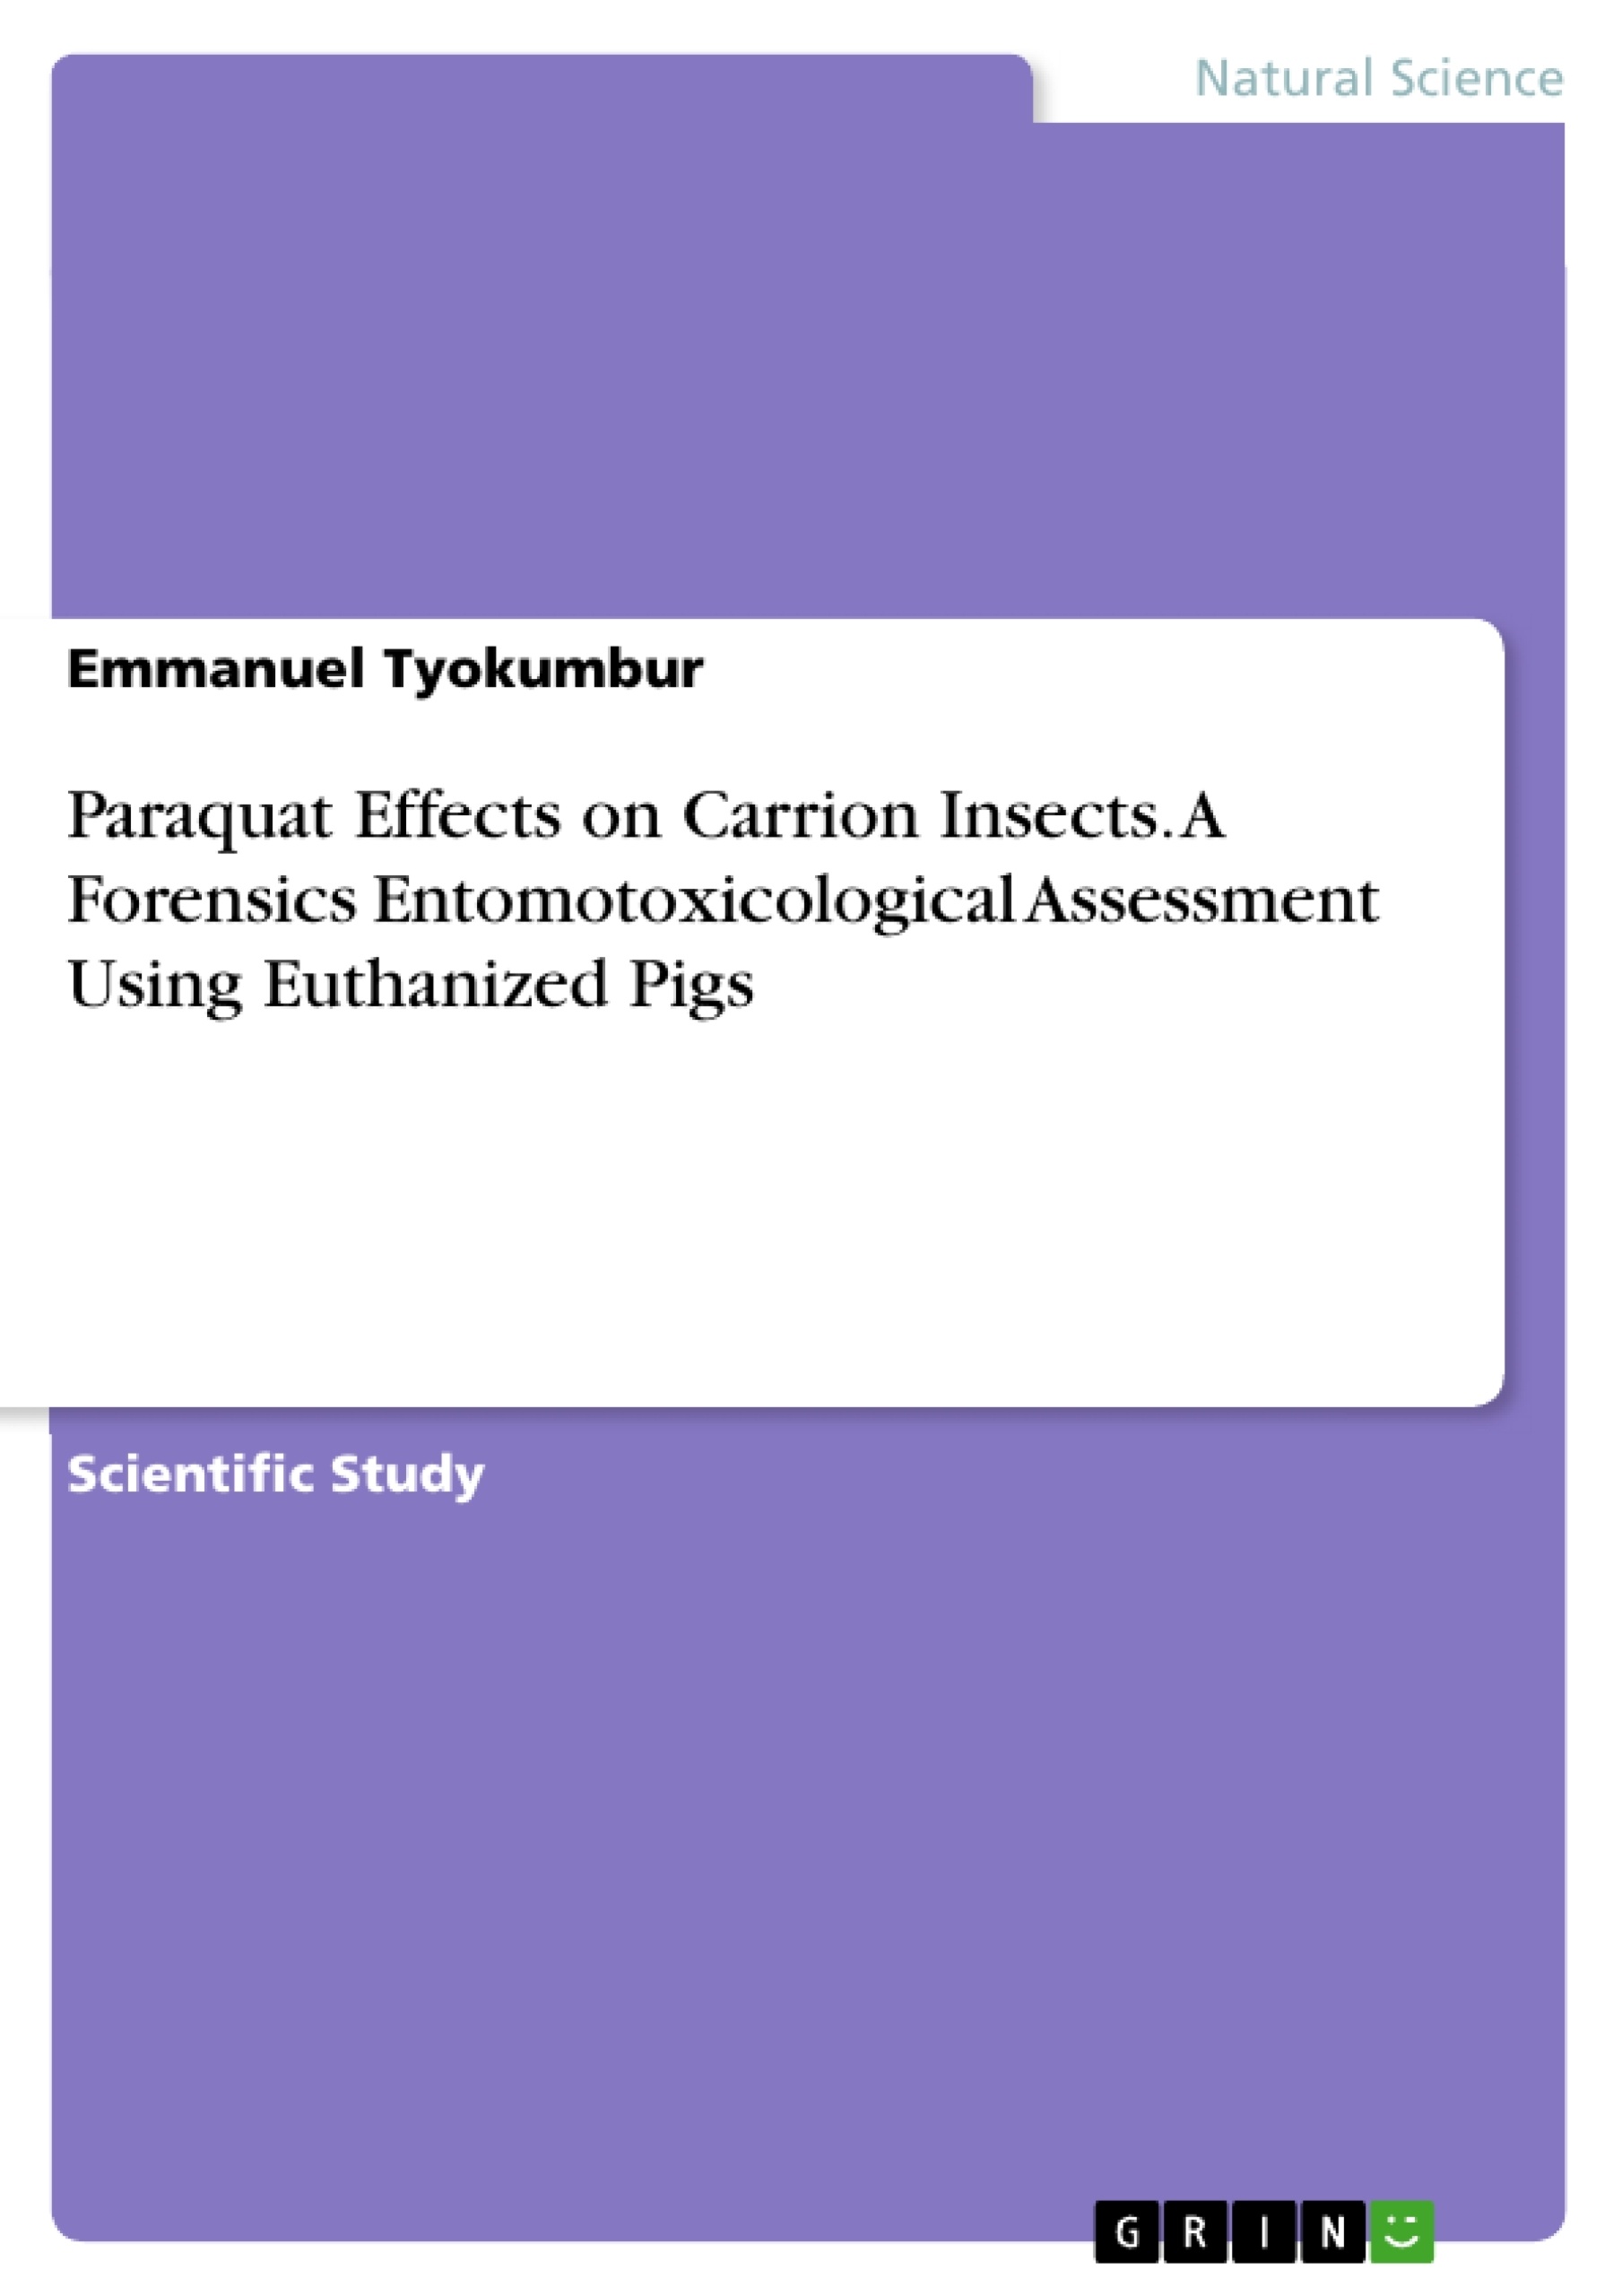 Título: Paraquat Effects on Carrion Insects. A Forensics Entomotoxicological Assessment Using Euthanized Pigs